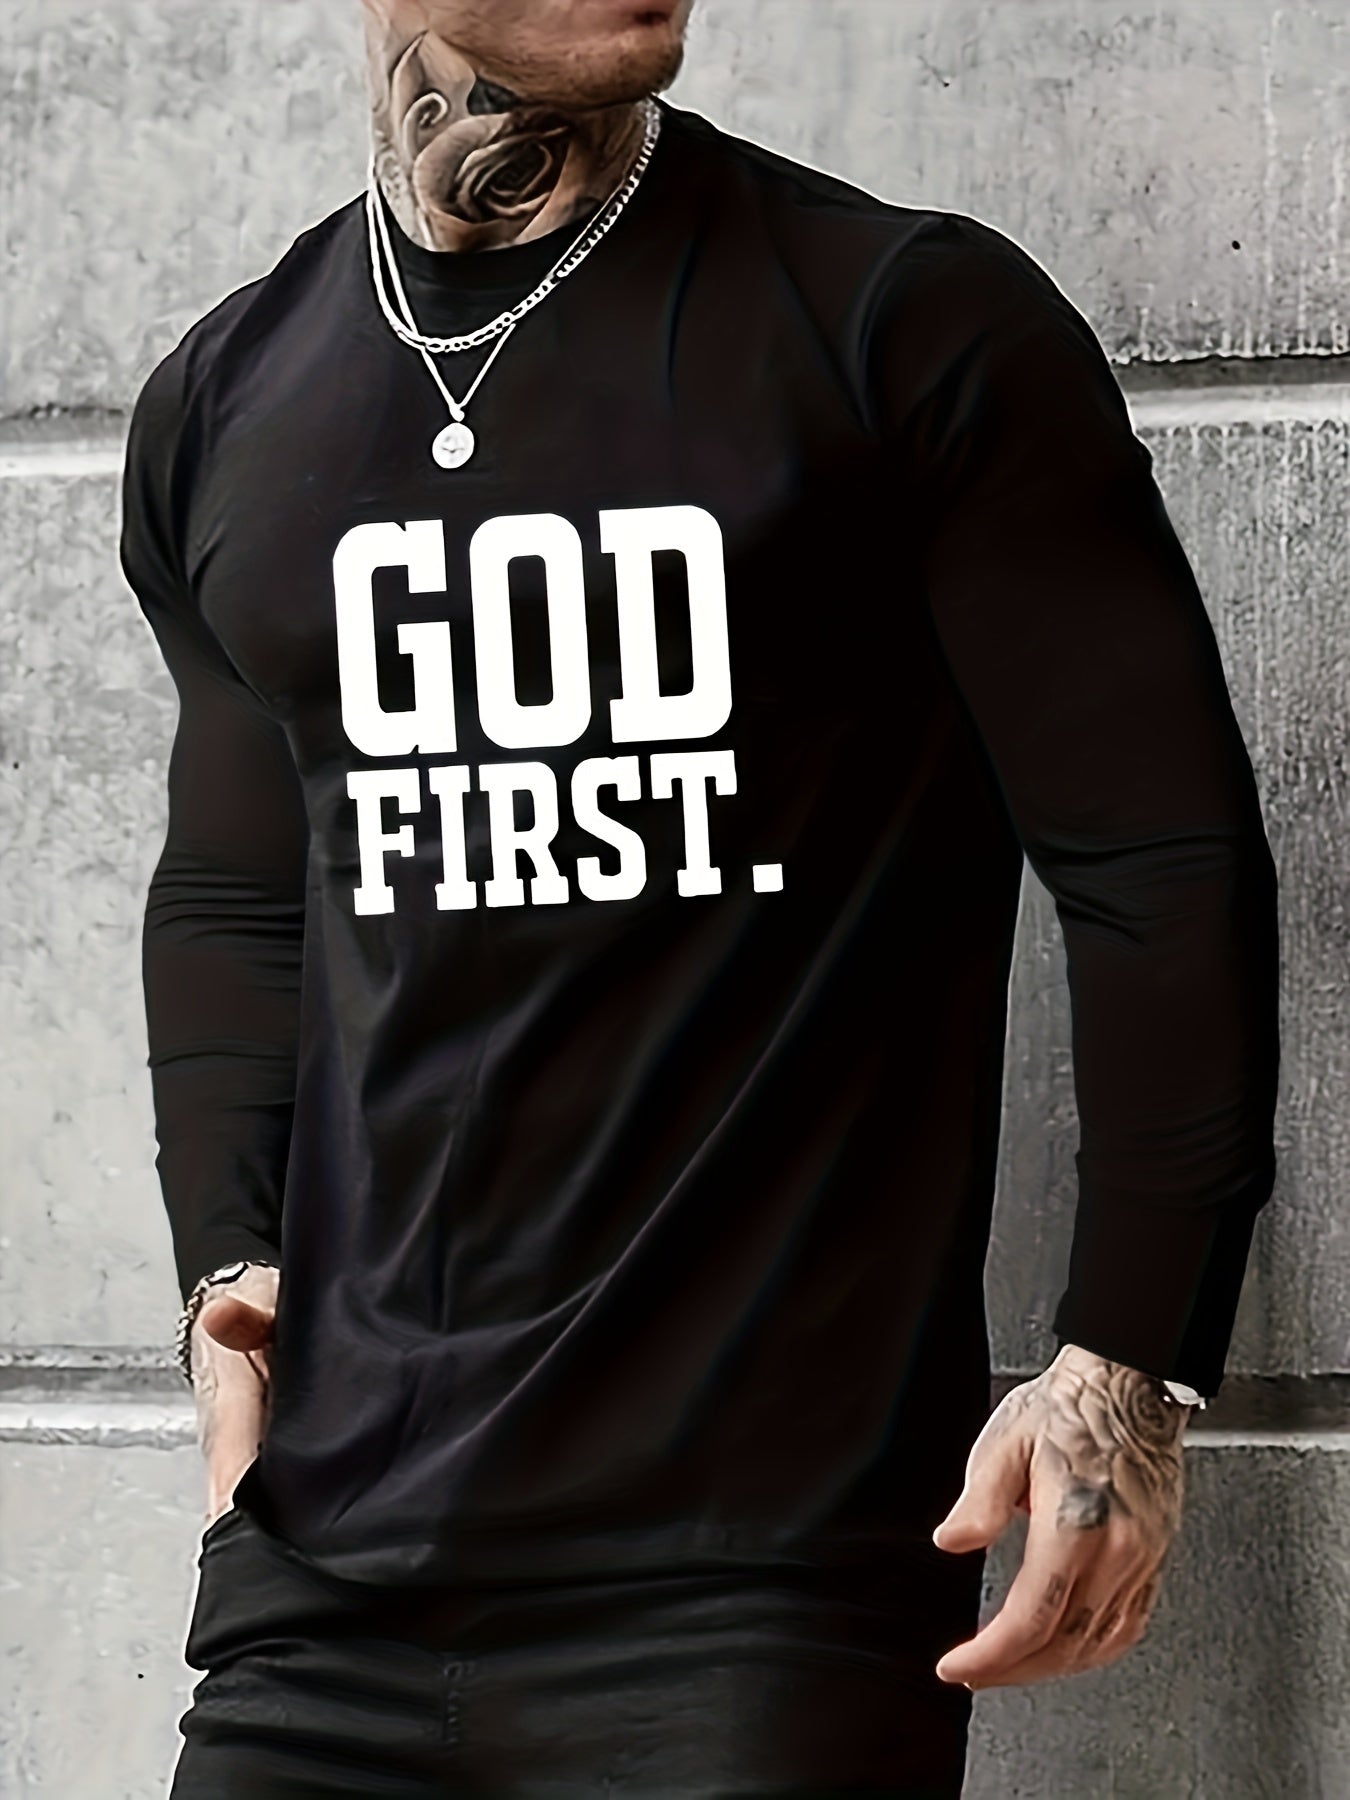 GOD First Print, Men's Graphic Design Crew Neck Long Sleeves Black Active T-shirt, Casual Comfy Shirts For Spring Summer Autumn, Men's Clothing Tops